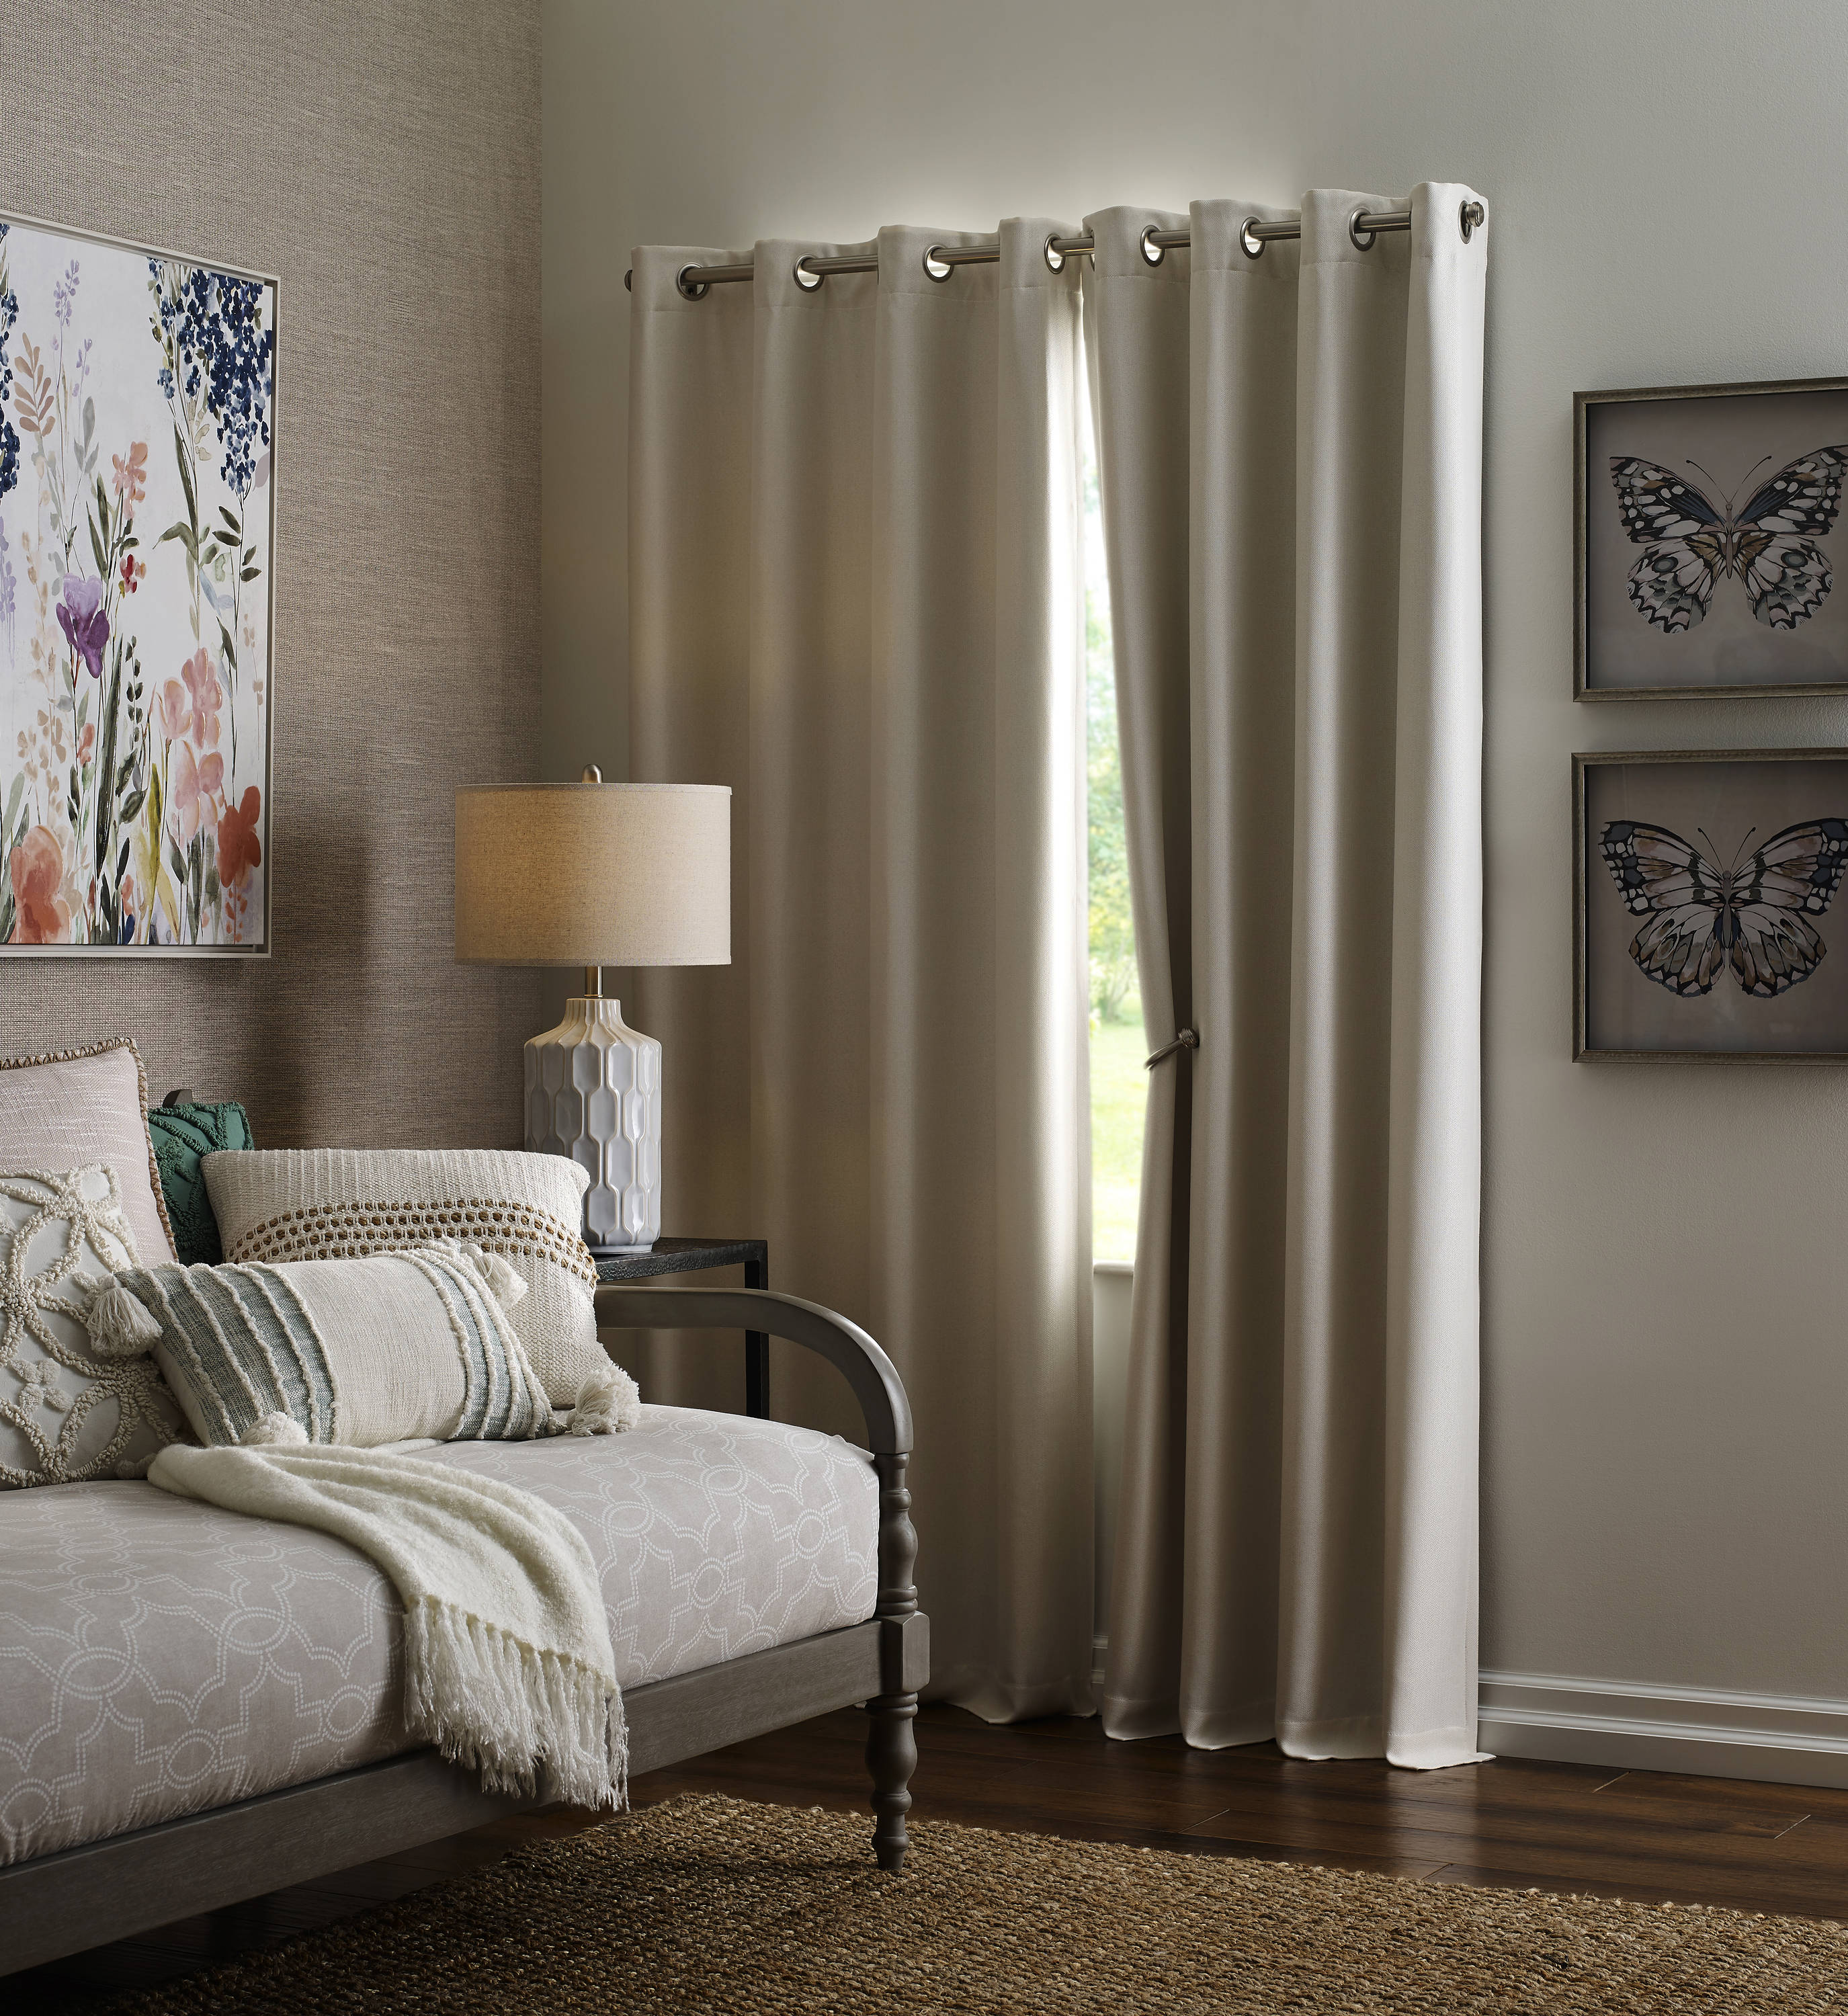 Pottery Barn Classic Blackout Curtain Review: Stylish Luxury